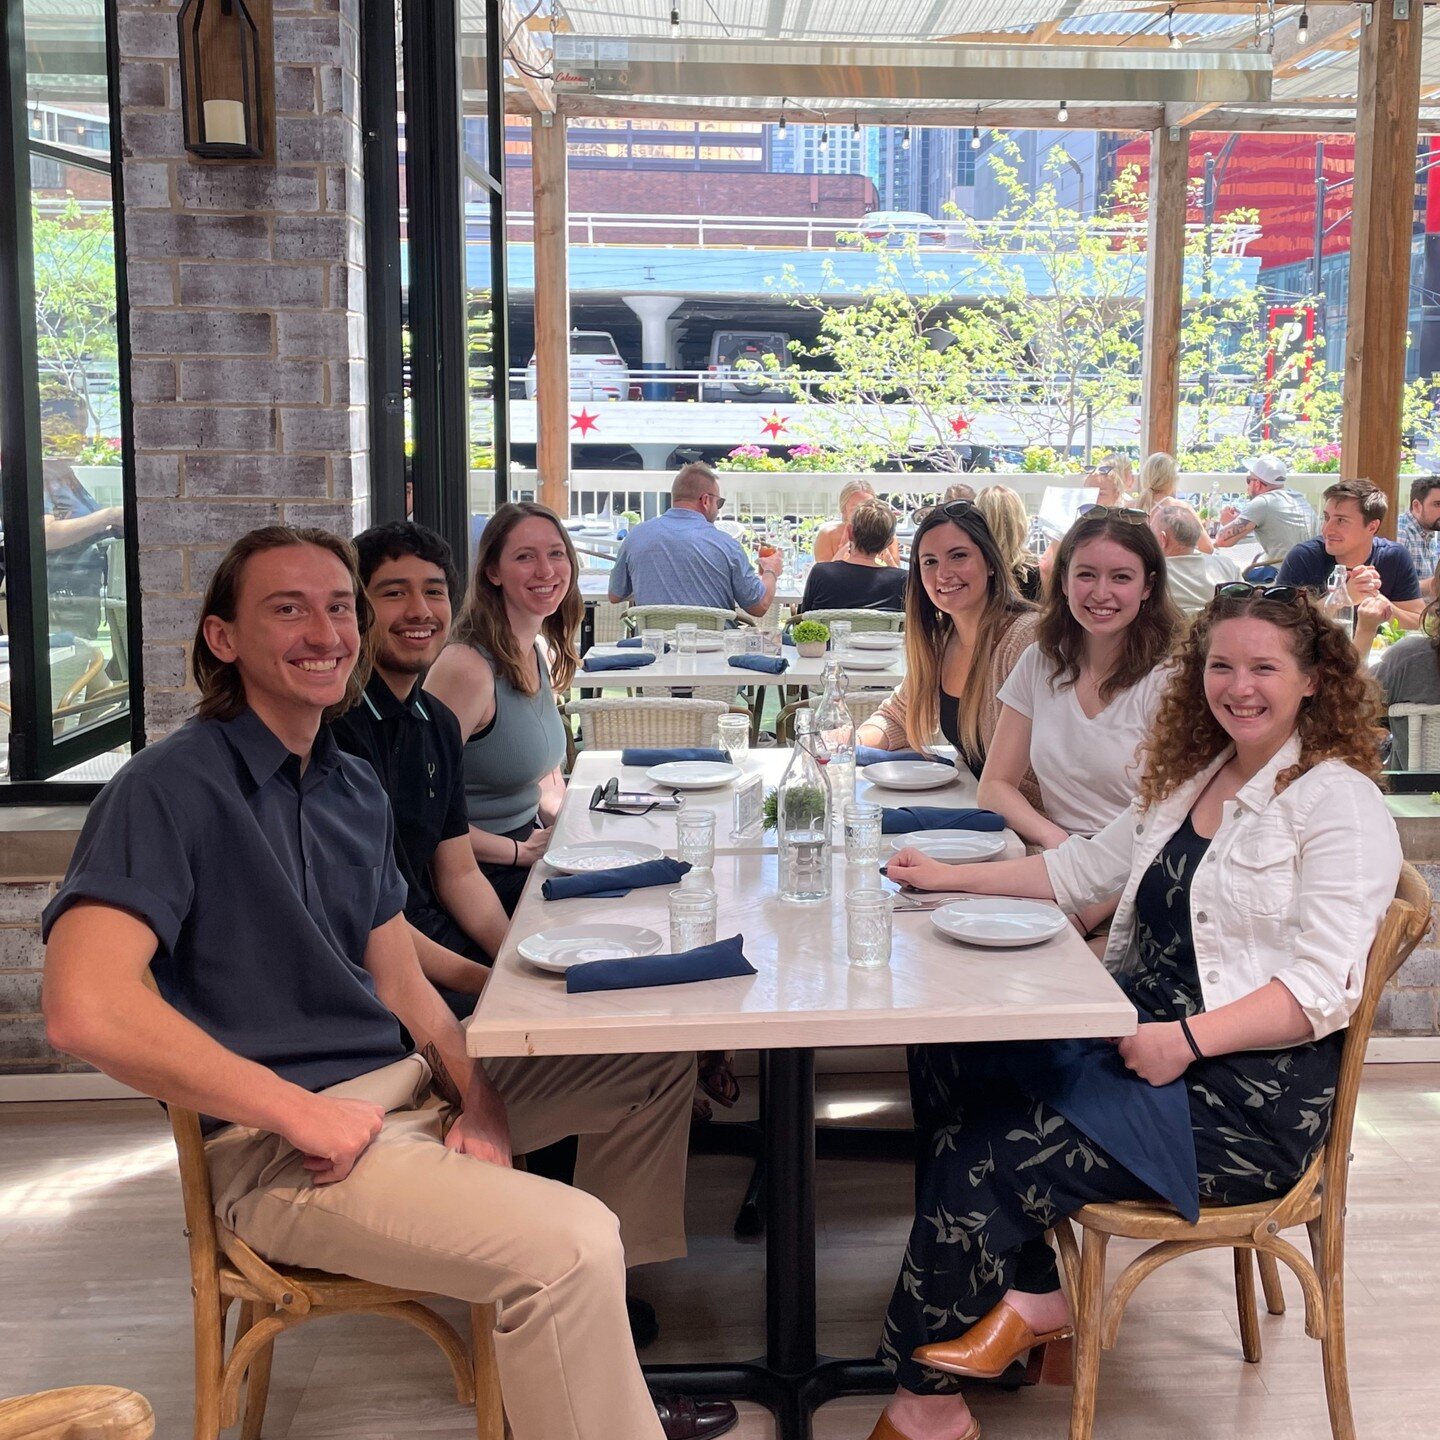 Spotted🔎 members of our Chi-town team dining alfresco for lunch at @thehamptonsocial. Here's to more memories like this across all of our office locations worldwide! 

#agency #agencylife #agencyculture